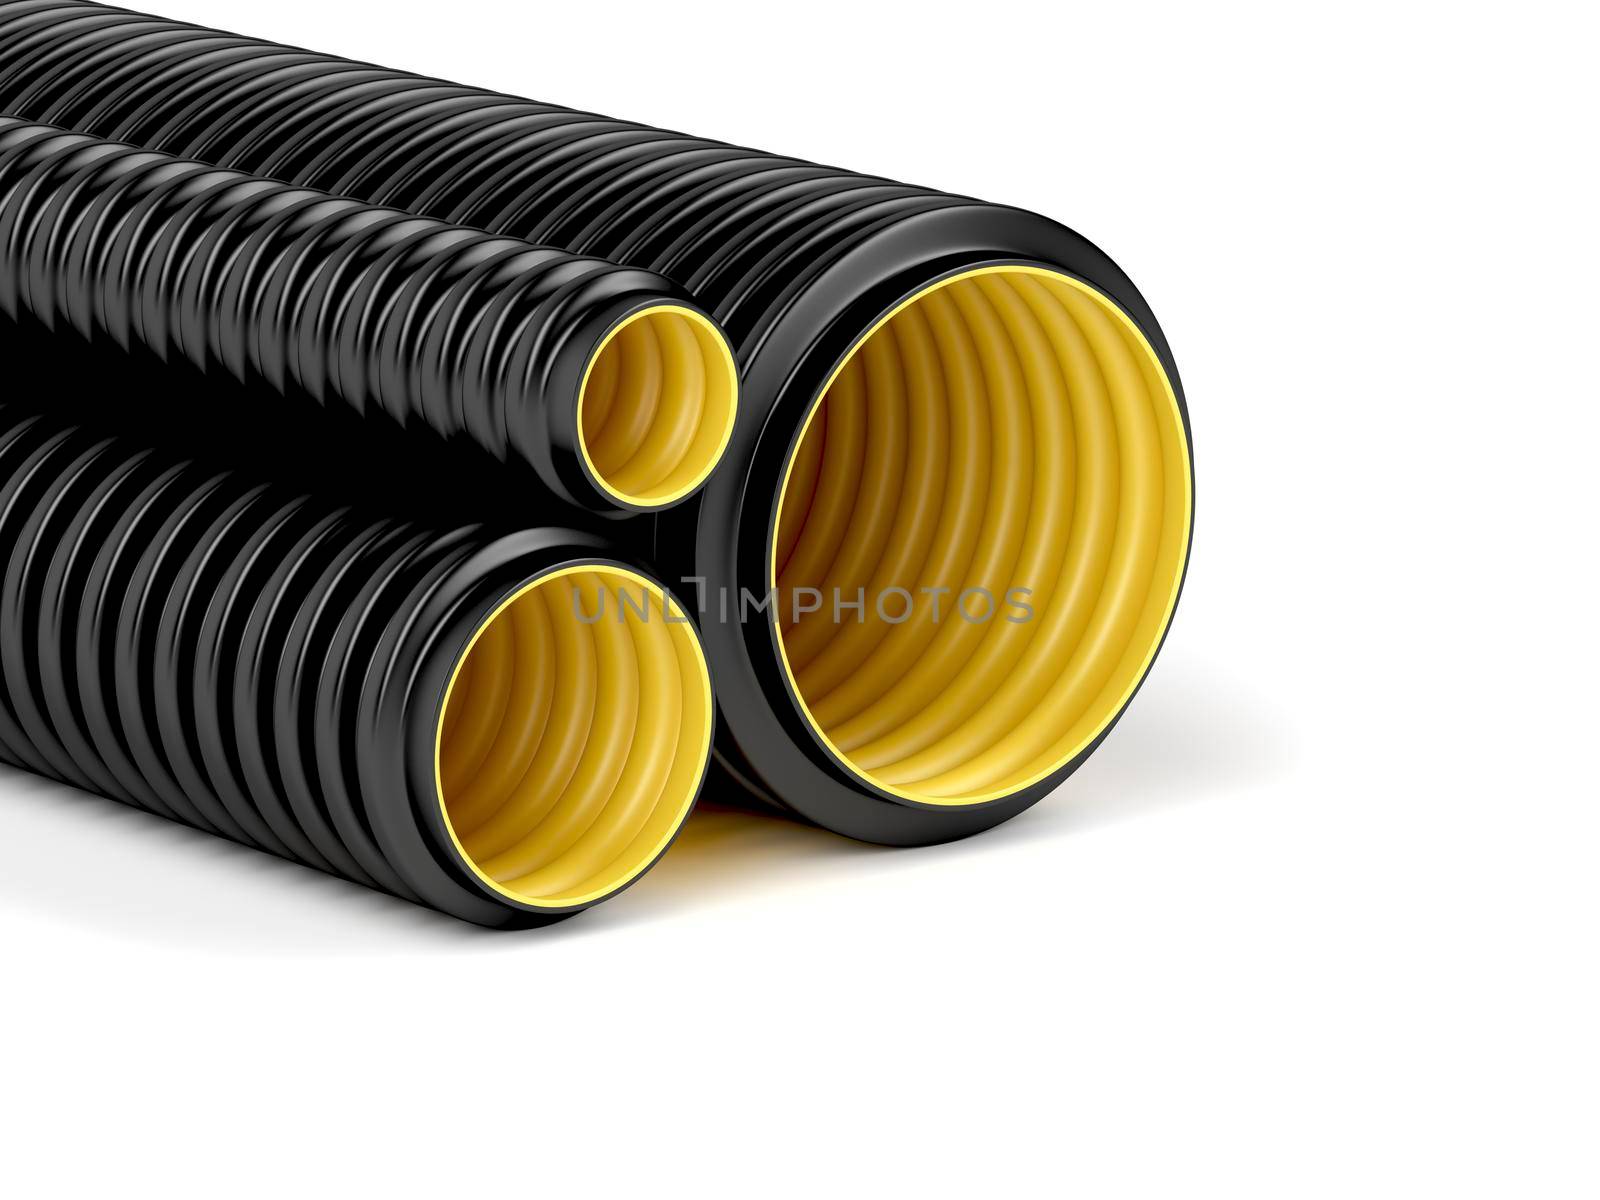 Corrugated pipes with different sizes by magraphics